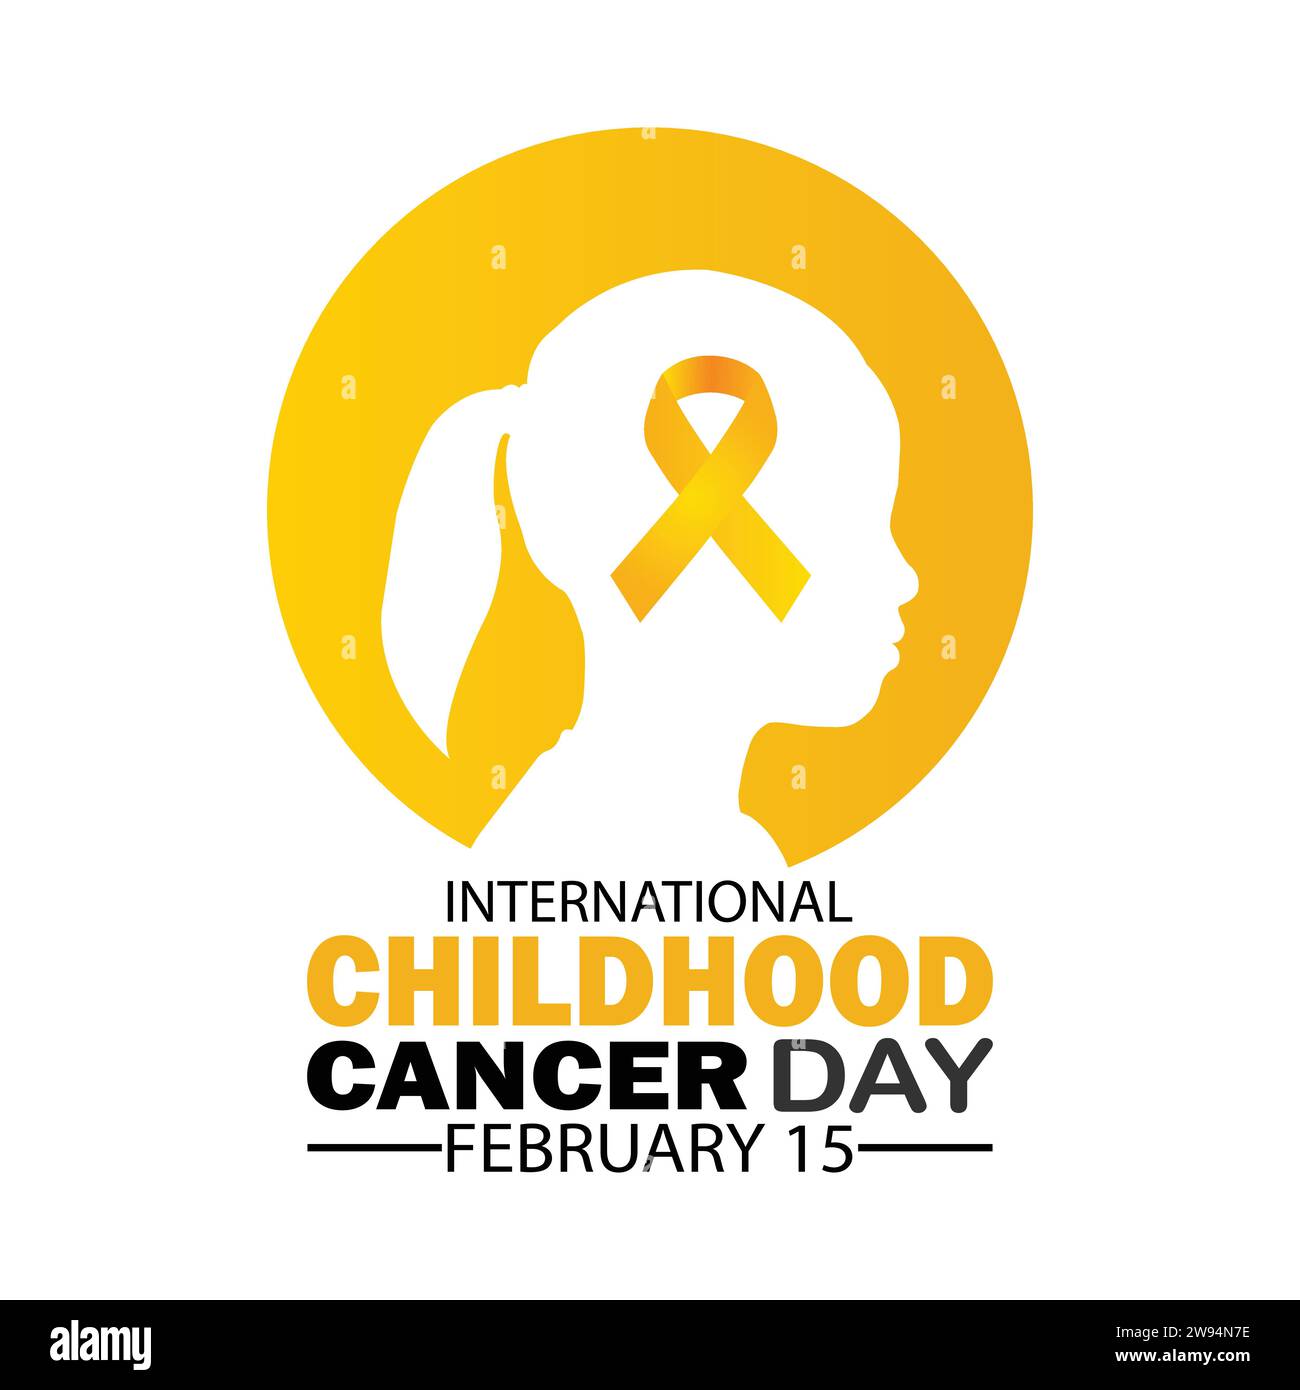 International Childhood Cancer Day Vector. February 15. Holiday concept. Template for background, banner, card, poster with text inscription. Stock Vector